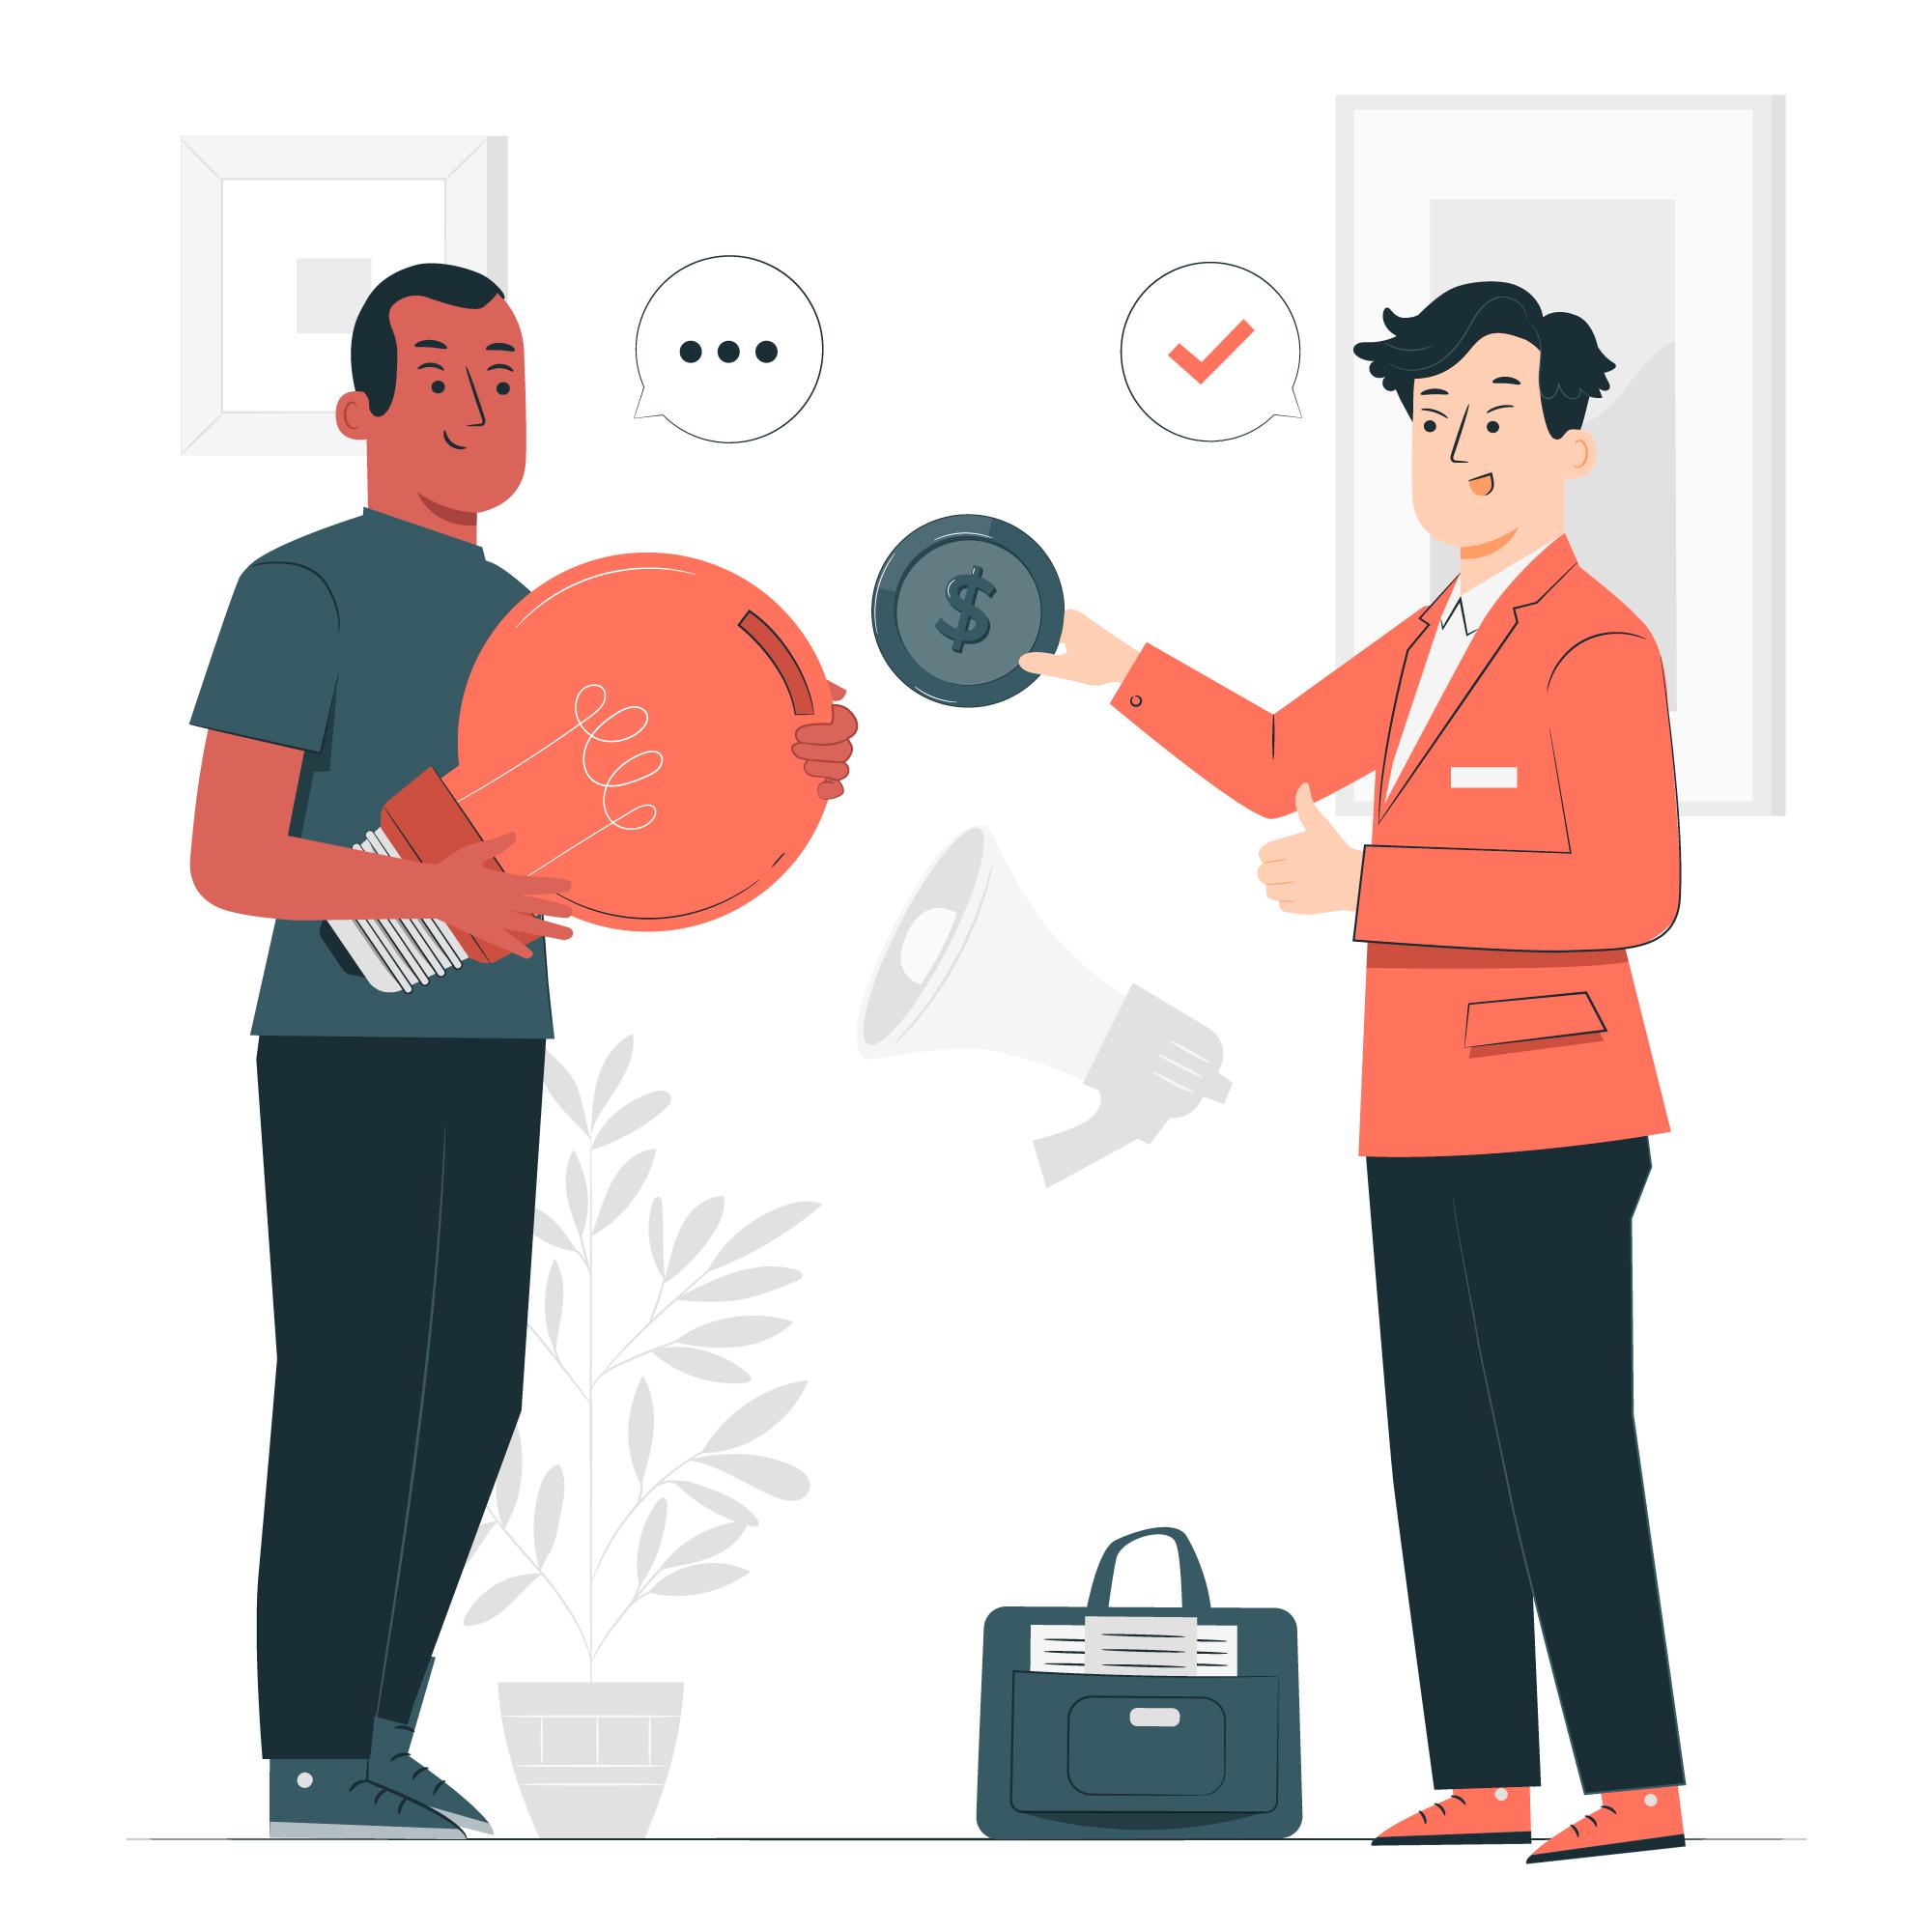 person handing money to a person holding a giant light bulb graphic vector illustration